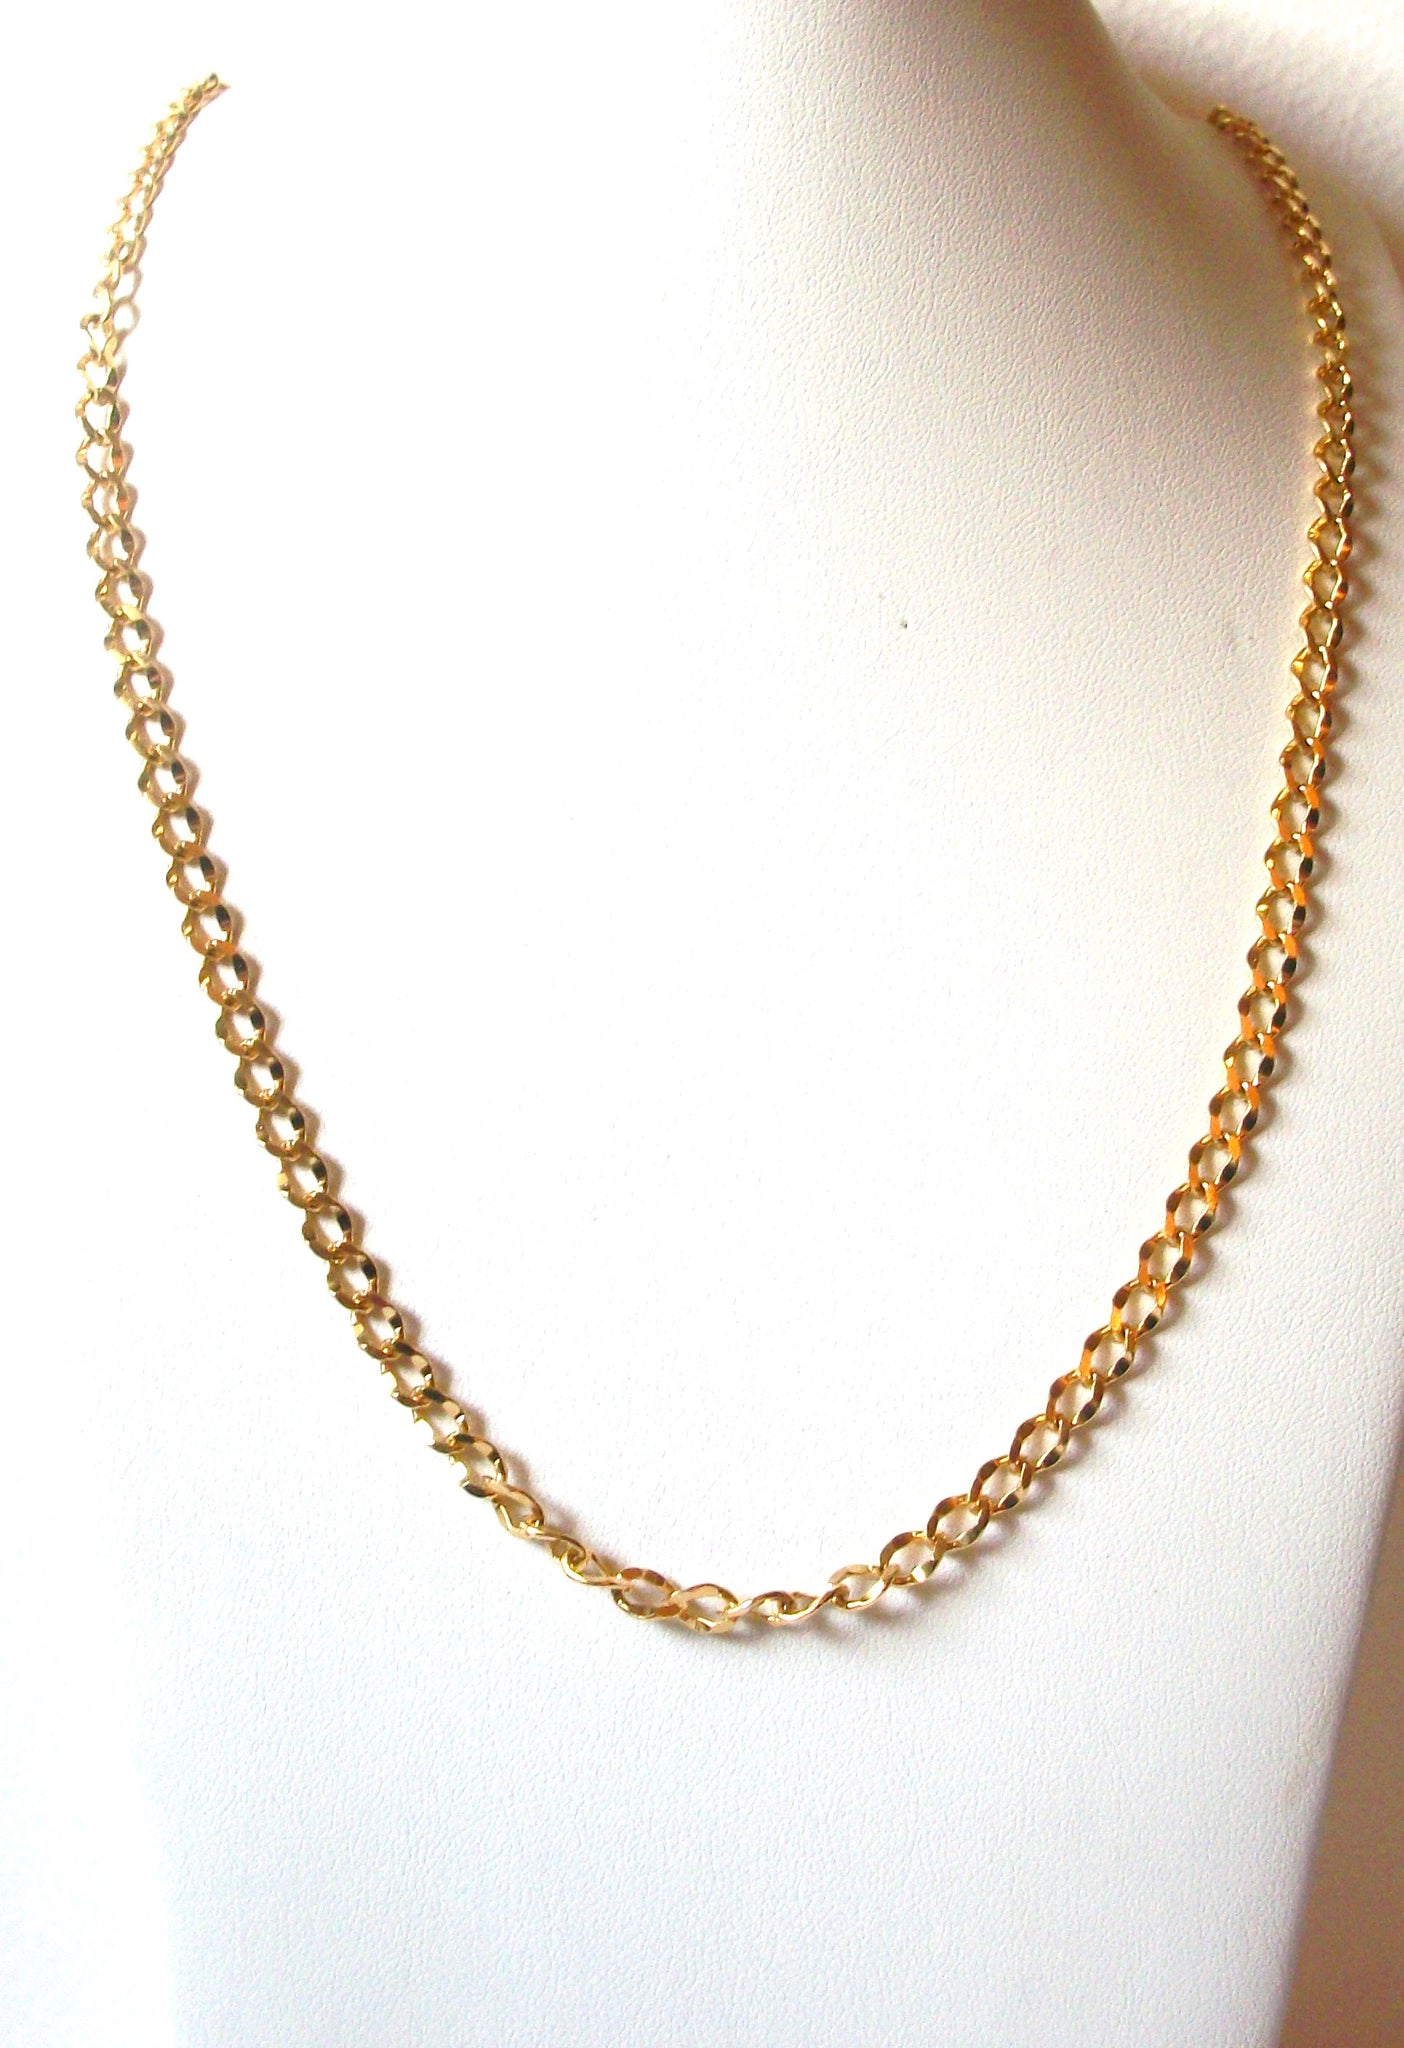 24 Inch KOREA Gold Toned Chain Link Necklace 122720